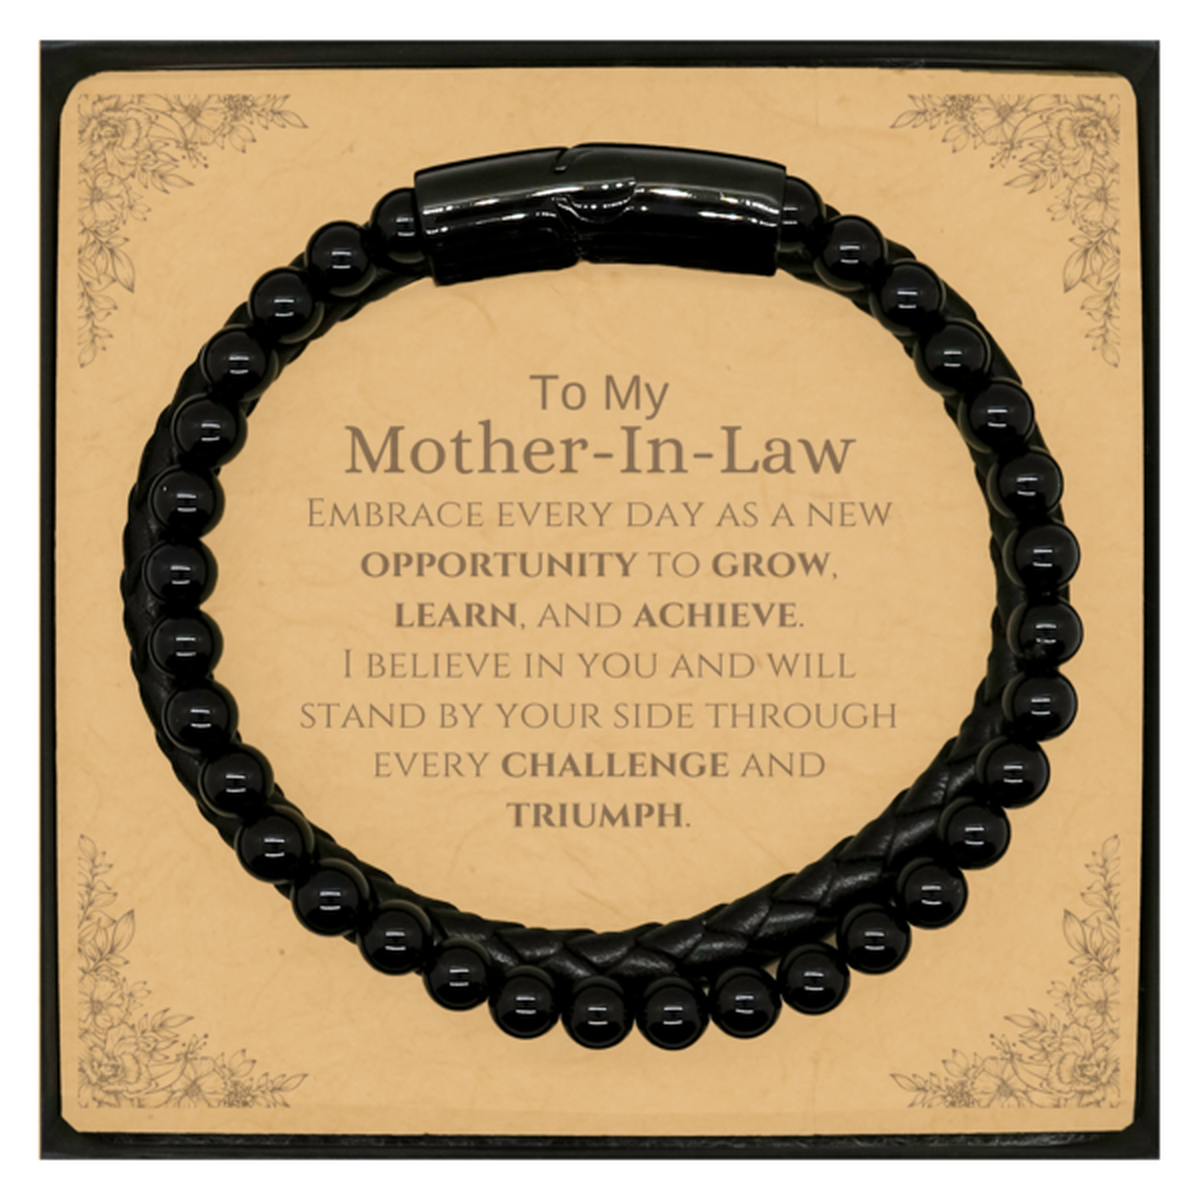 To My Mother-In-Law Gifts, I believe in you and will stand by your side, Inspirational Stone Leather Bracelets For Mother-In-Law, Birthday Christmas Motivational Mother-In-Law Gifts